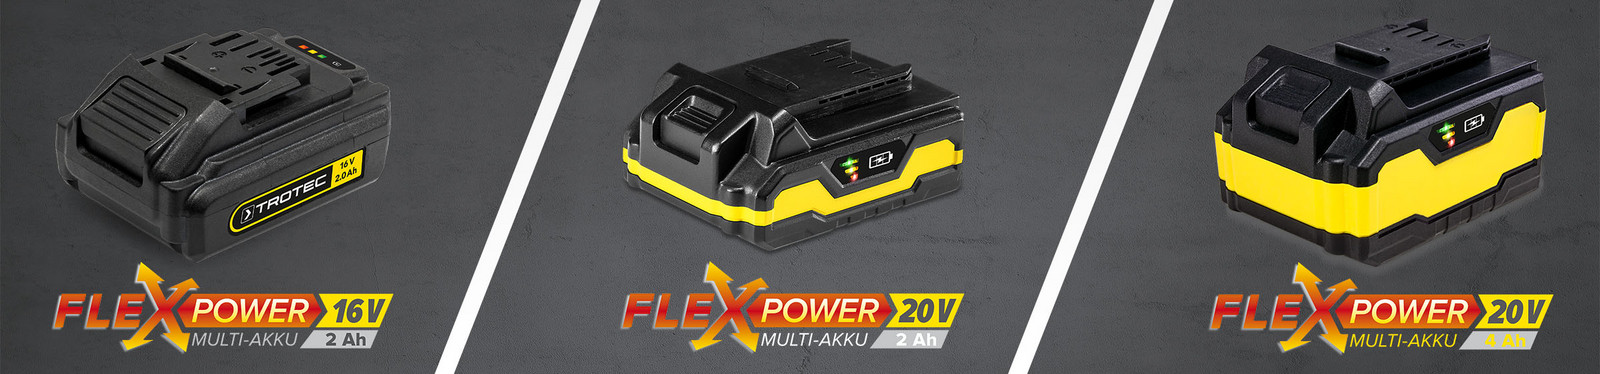 Flexpower – the innovative battery exchange system from Trotec